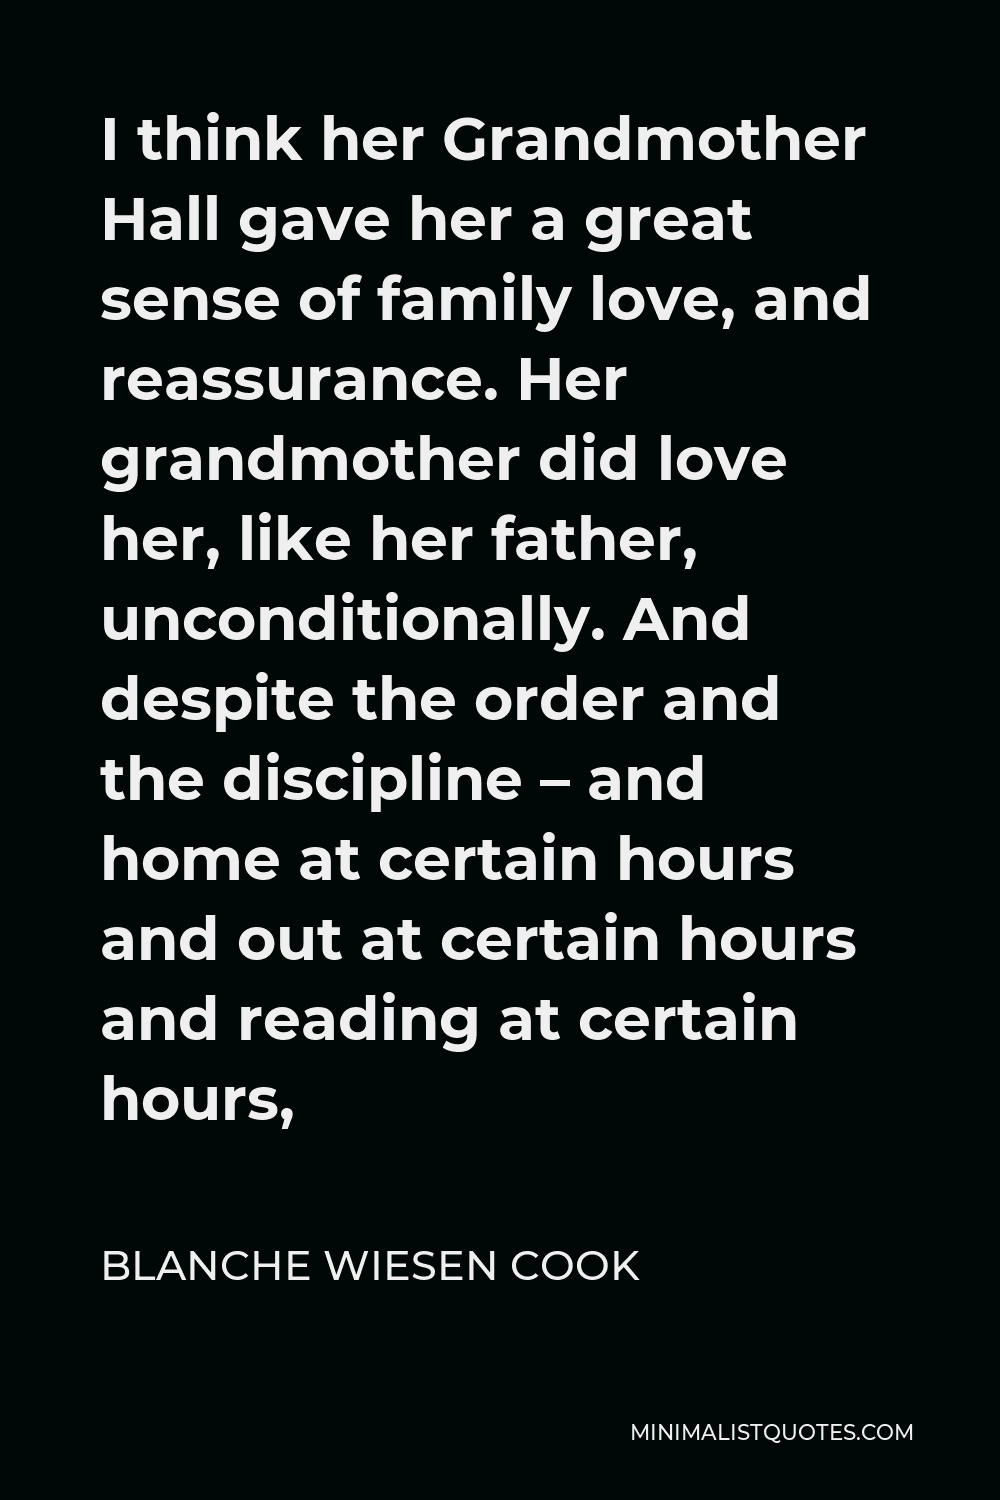 Blanche Wiesen Cook Quote - I think her Grandmother Hall gave her a great sense of family love, and reassurance. Her grandmother did love her, like her father, unconditionally. And despite the order and the discipline – and home at certain hours and out at certain hours and reading at certain hours,